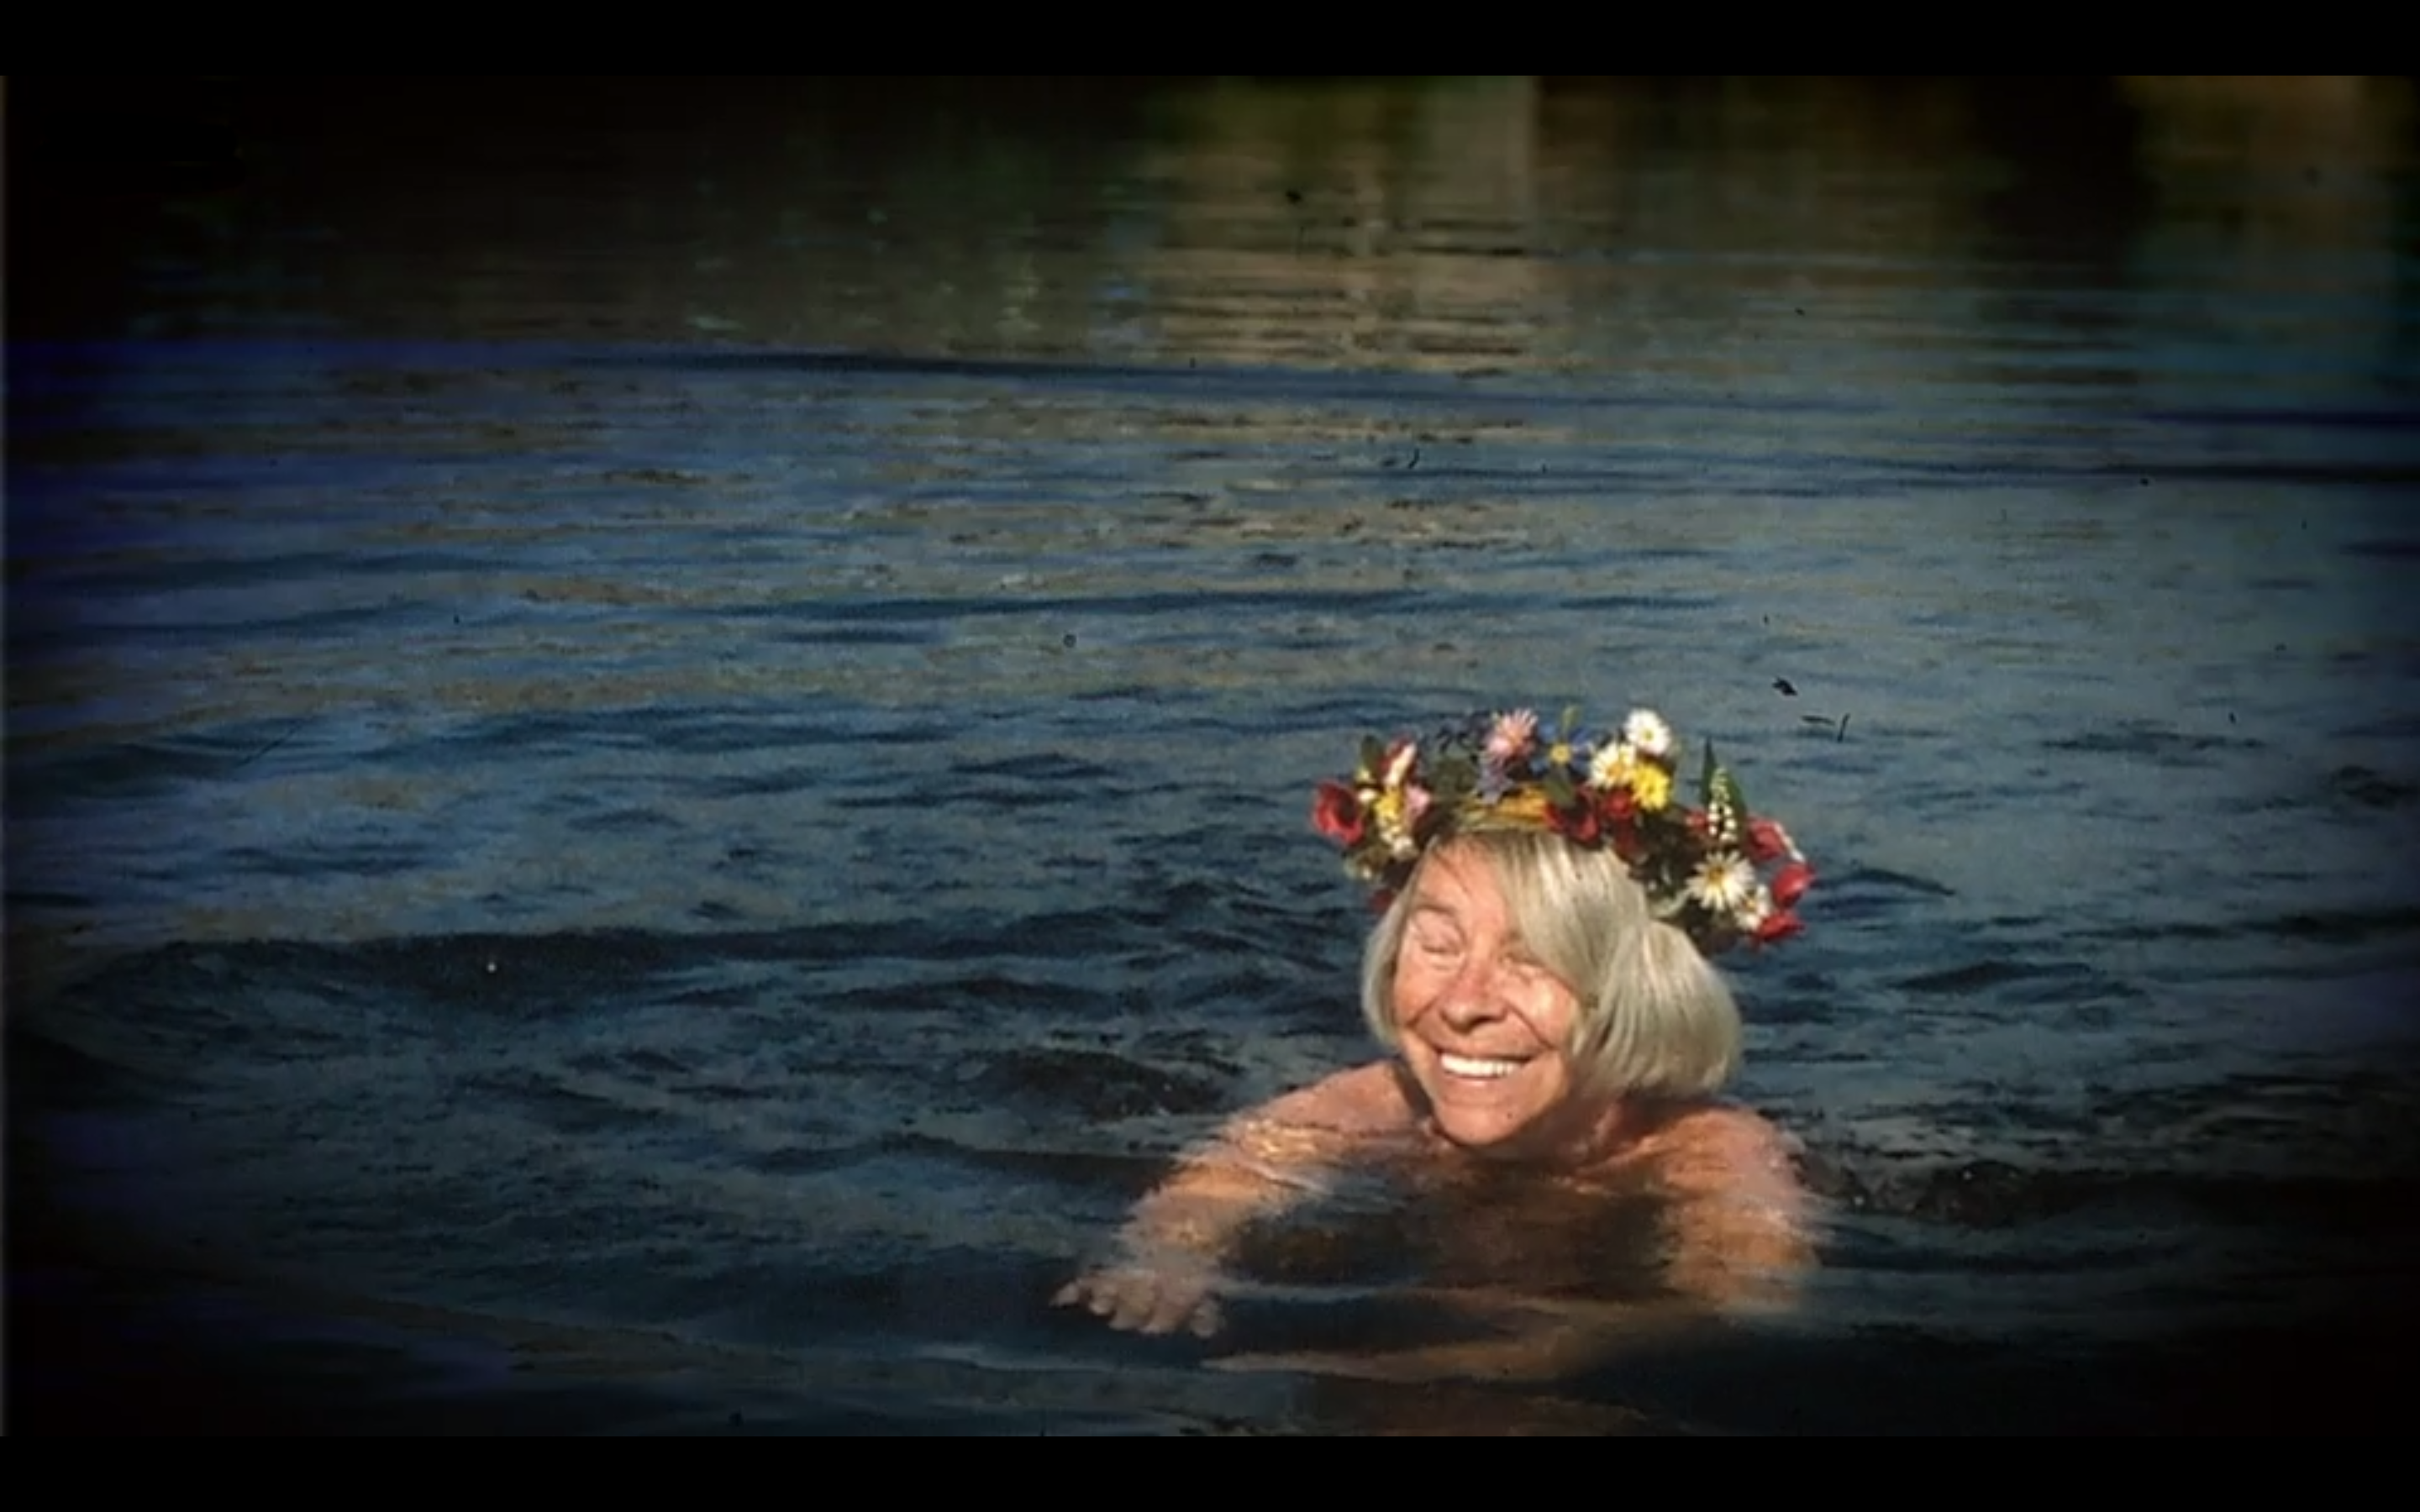 Screenshot of Tove Jansson swimming in Finland from the BBC documentary Moominland Tales: The Life of Tove Jansson